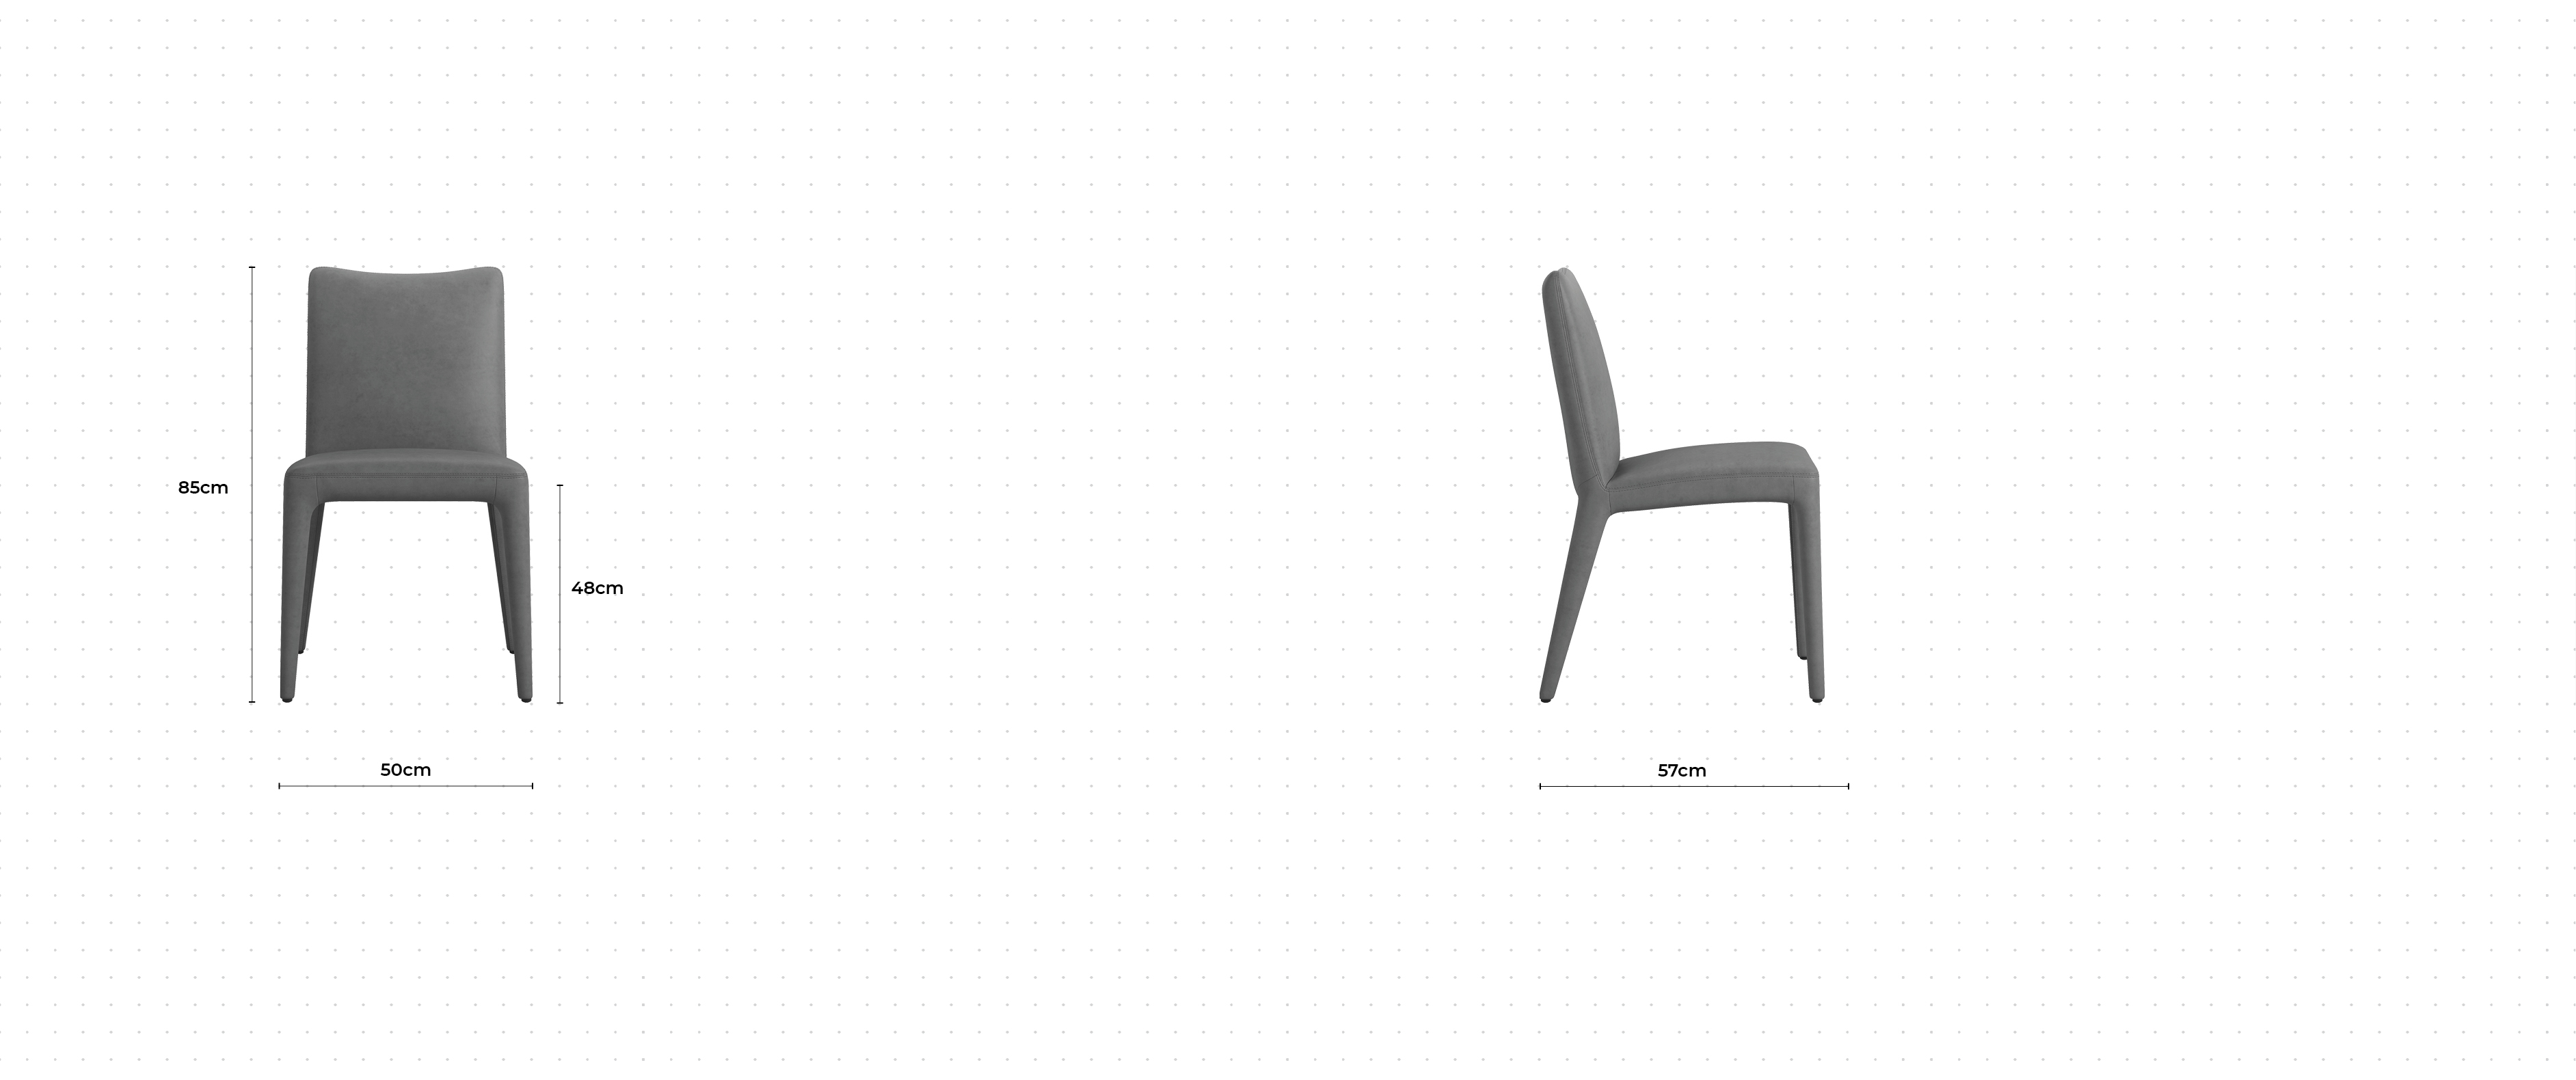 Monza Small Dining Chair dimensions